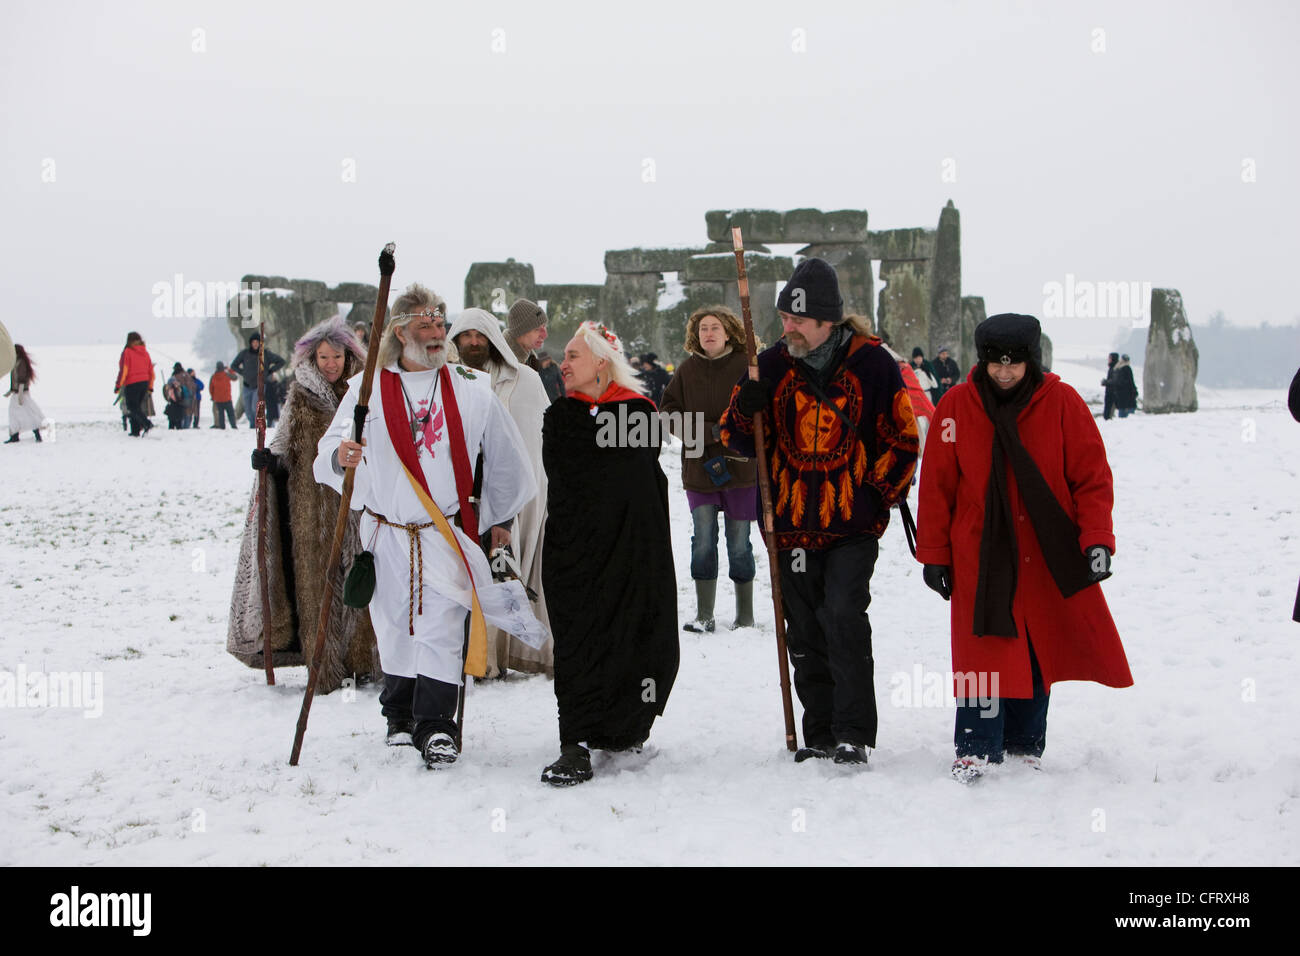 King Arthur Pendragon and other druids at Stonehenge after the Winter Solstice ceremony Stock Photo